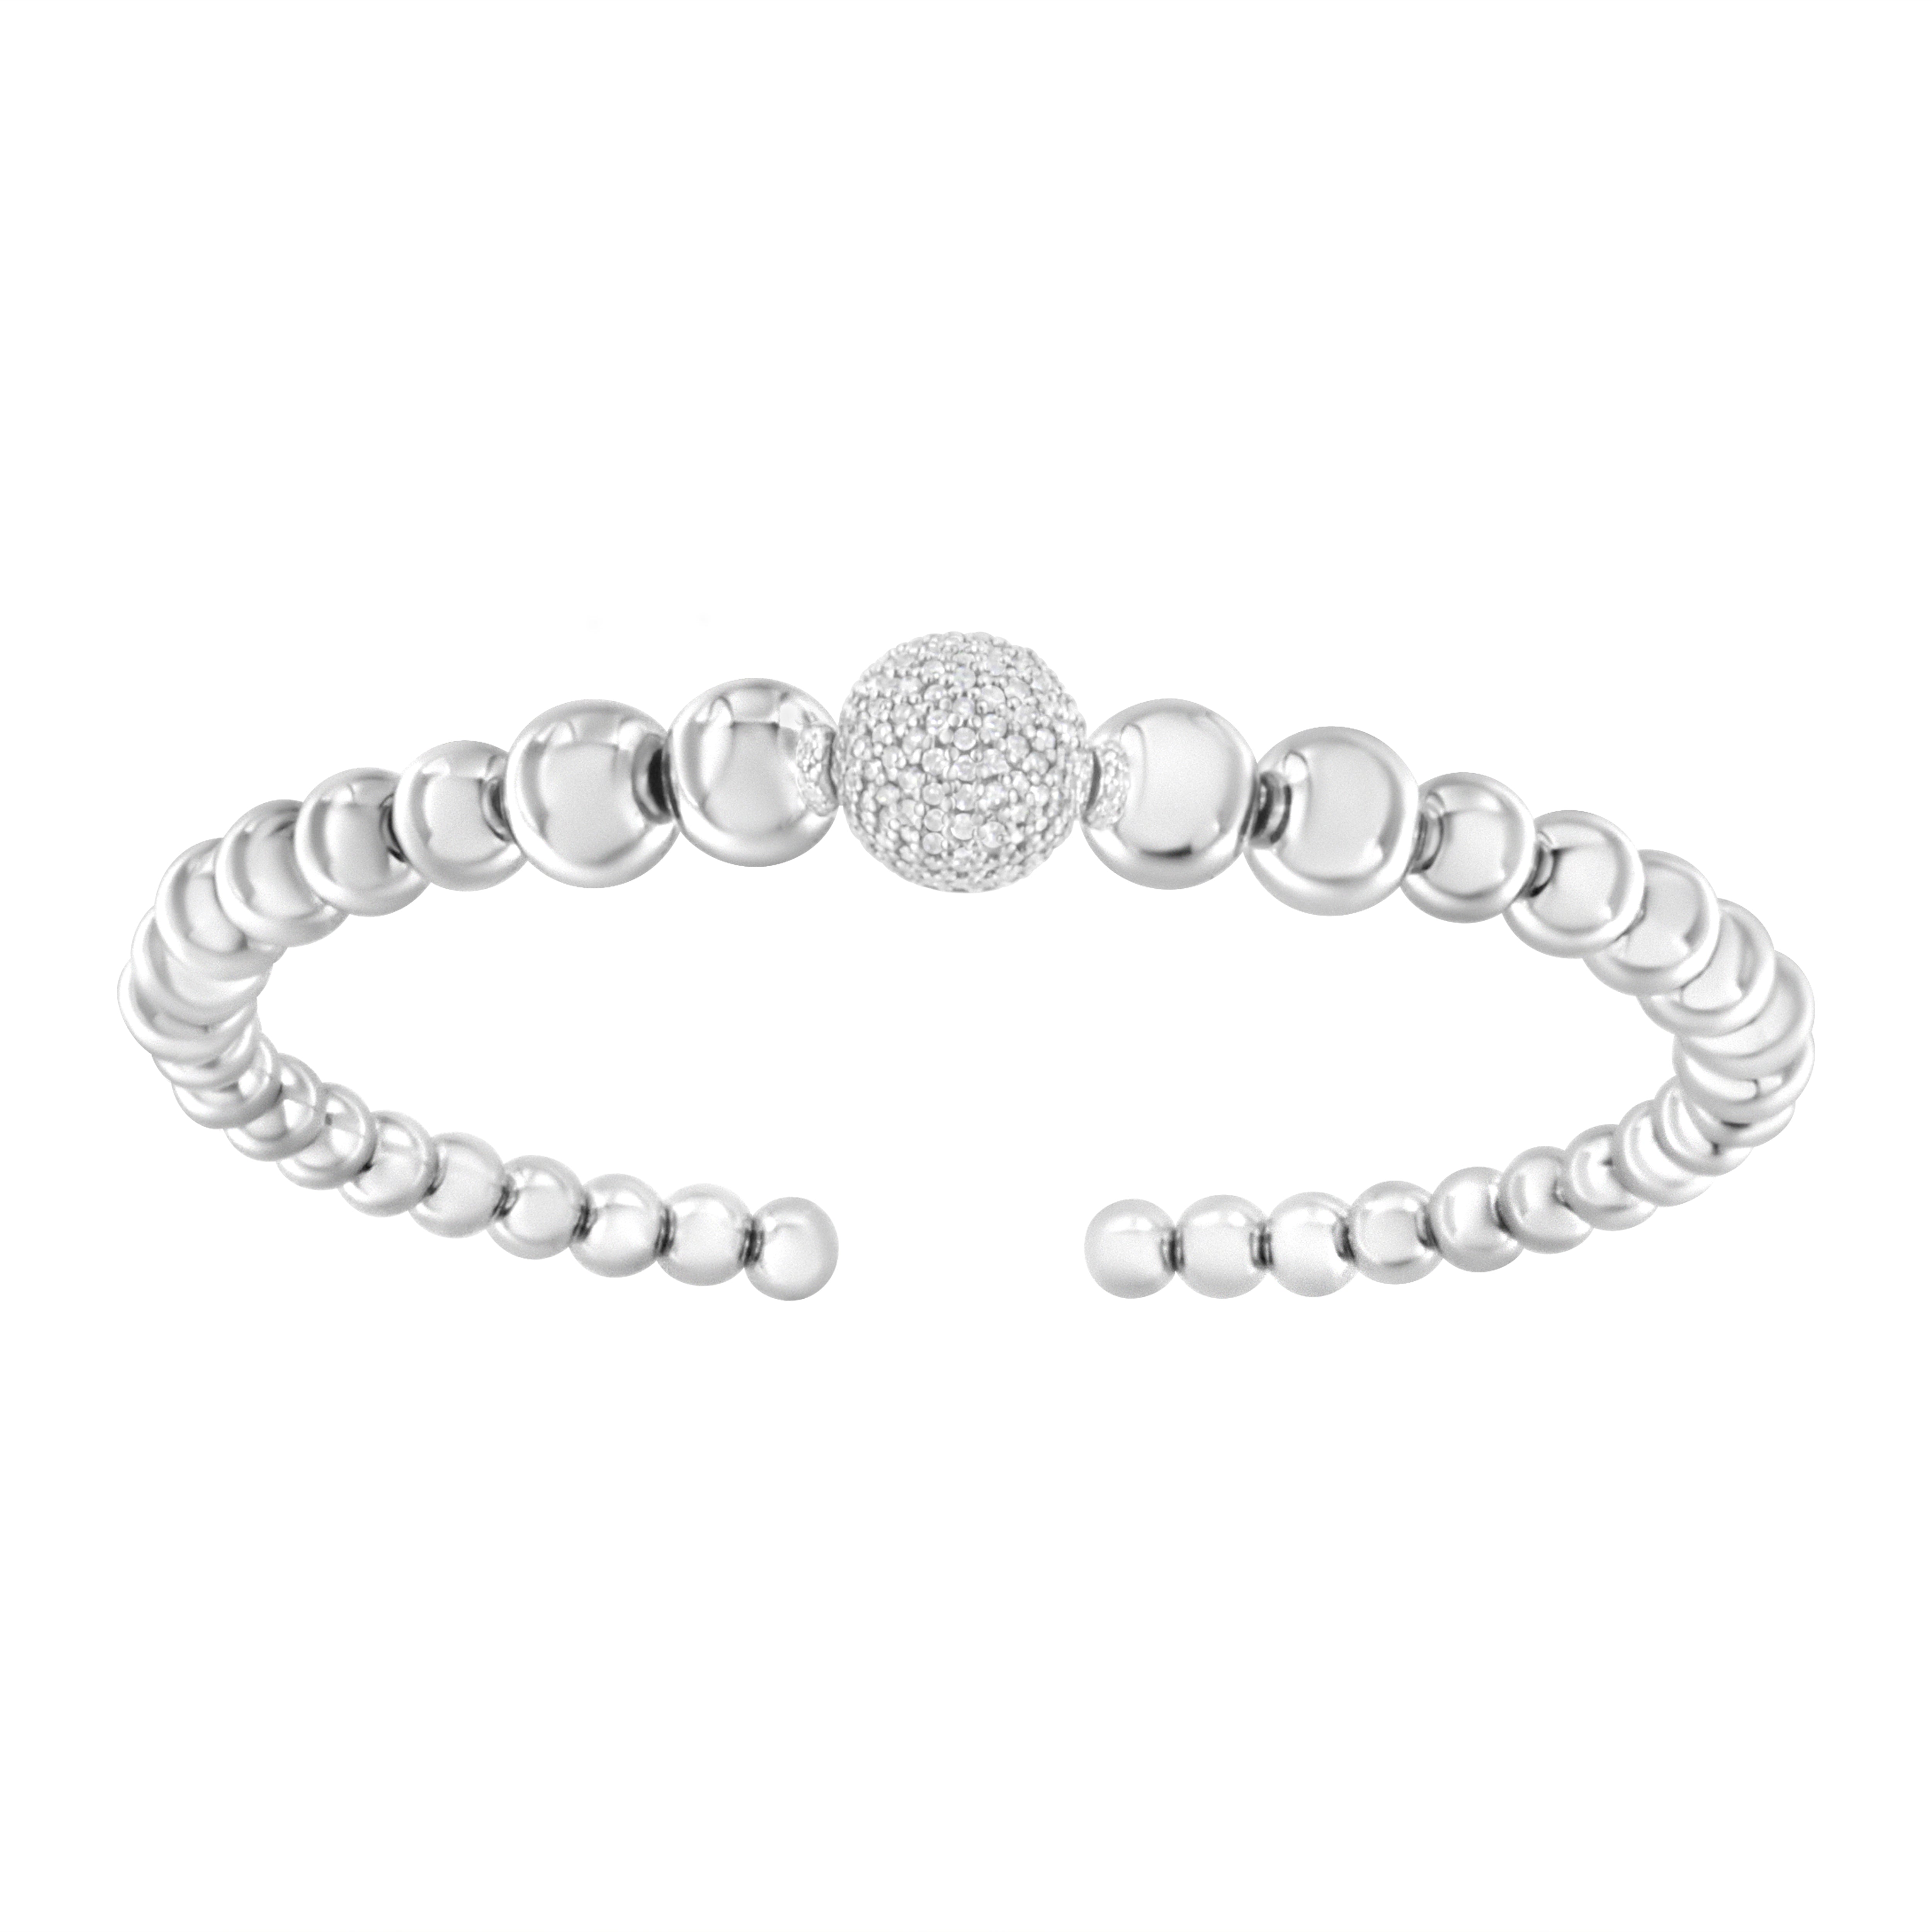 .925 Sterling Silver 1/6 Cttw Diamond Rondelle Graduated Ball Bead Cuff Bangle Bracelet (I-J color, I2-I3 clarity)-Fits wrists up to 7 1/2 inches-2